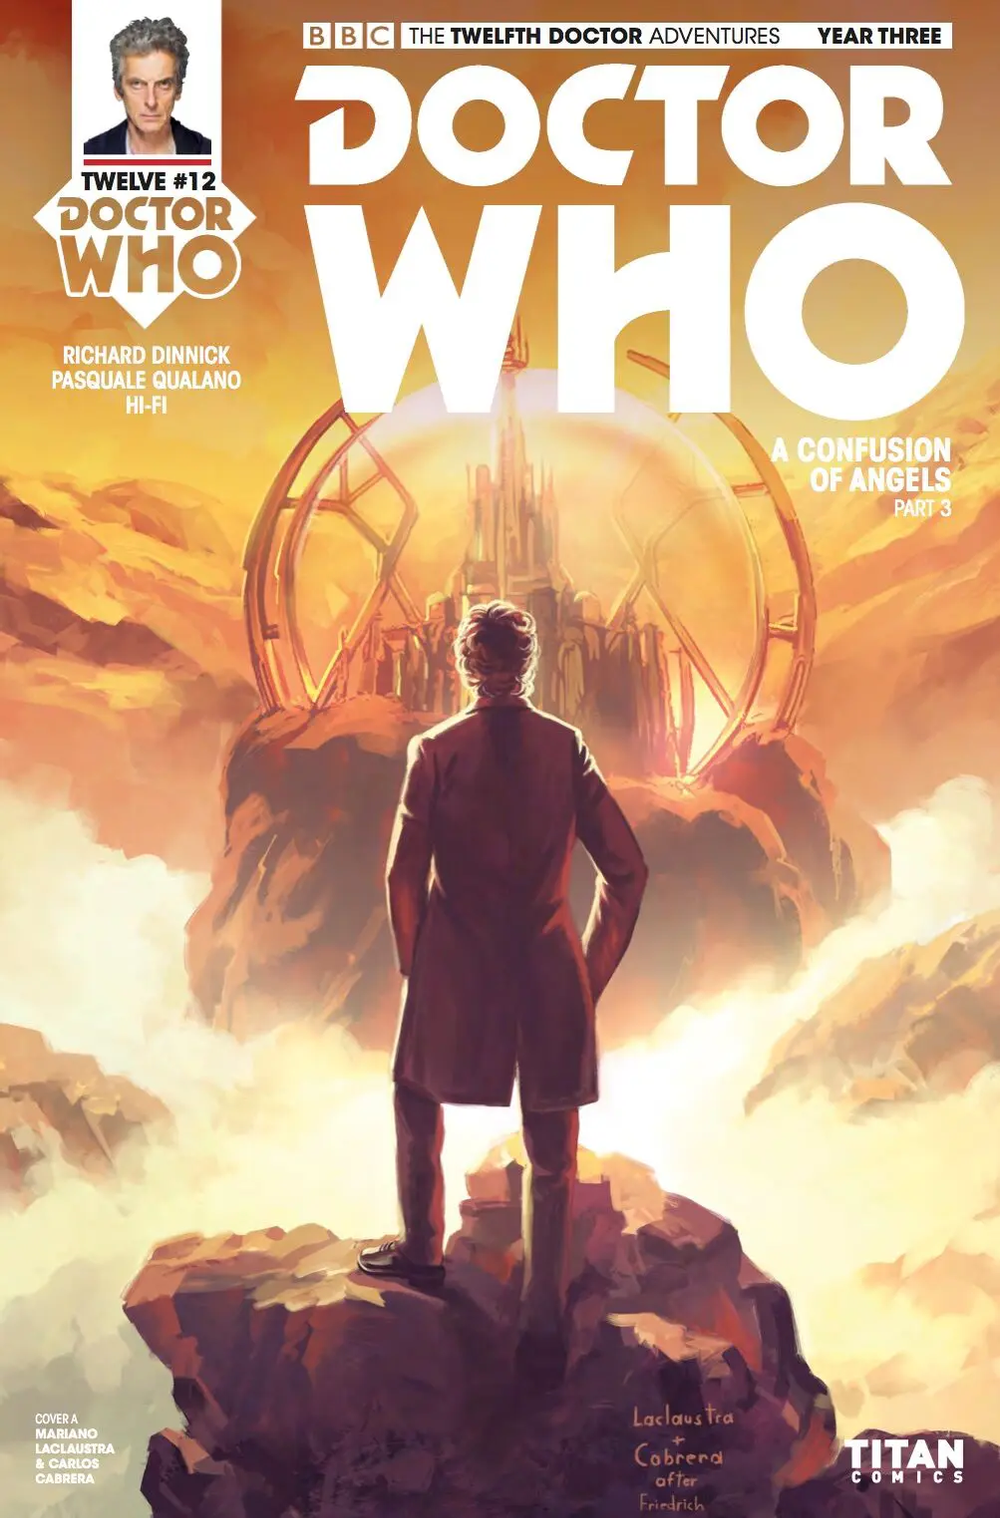 https://mediaproxy.tvtropes.org/width/1000/https://static.tvtropes.org/pmwiki/pub/images/doctor_who_twelfth_doctor_3_12_cover20a_previewjpeg.png